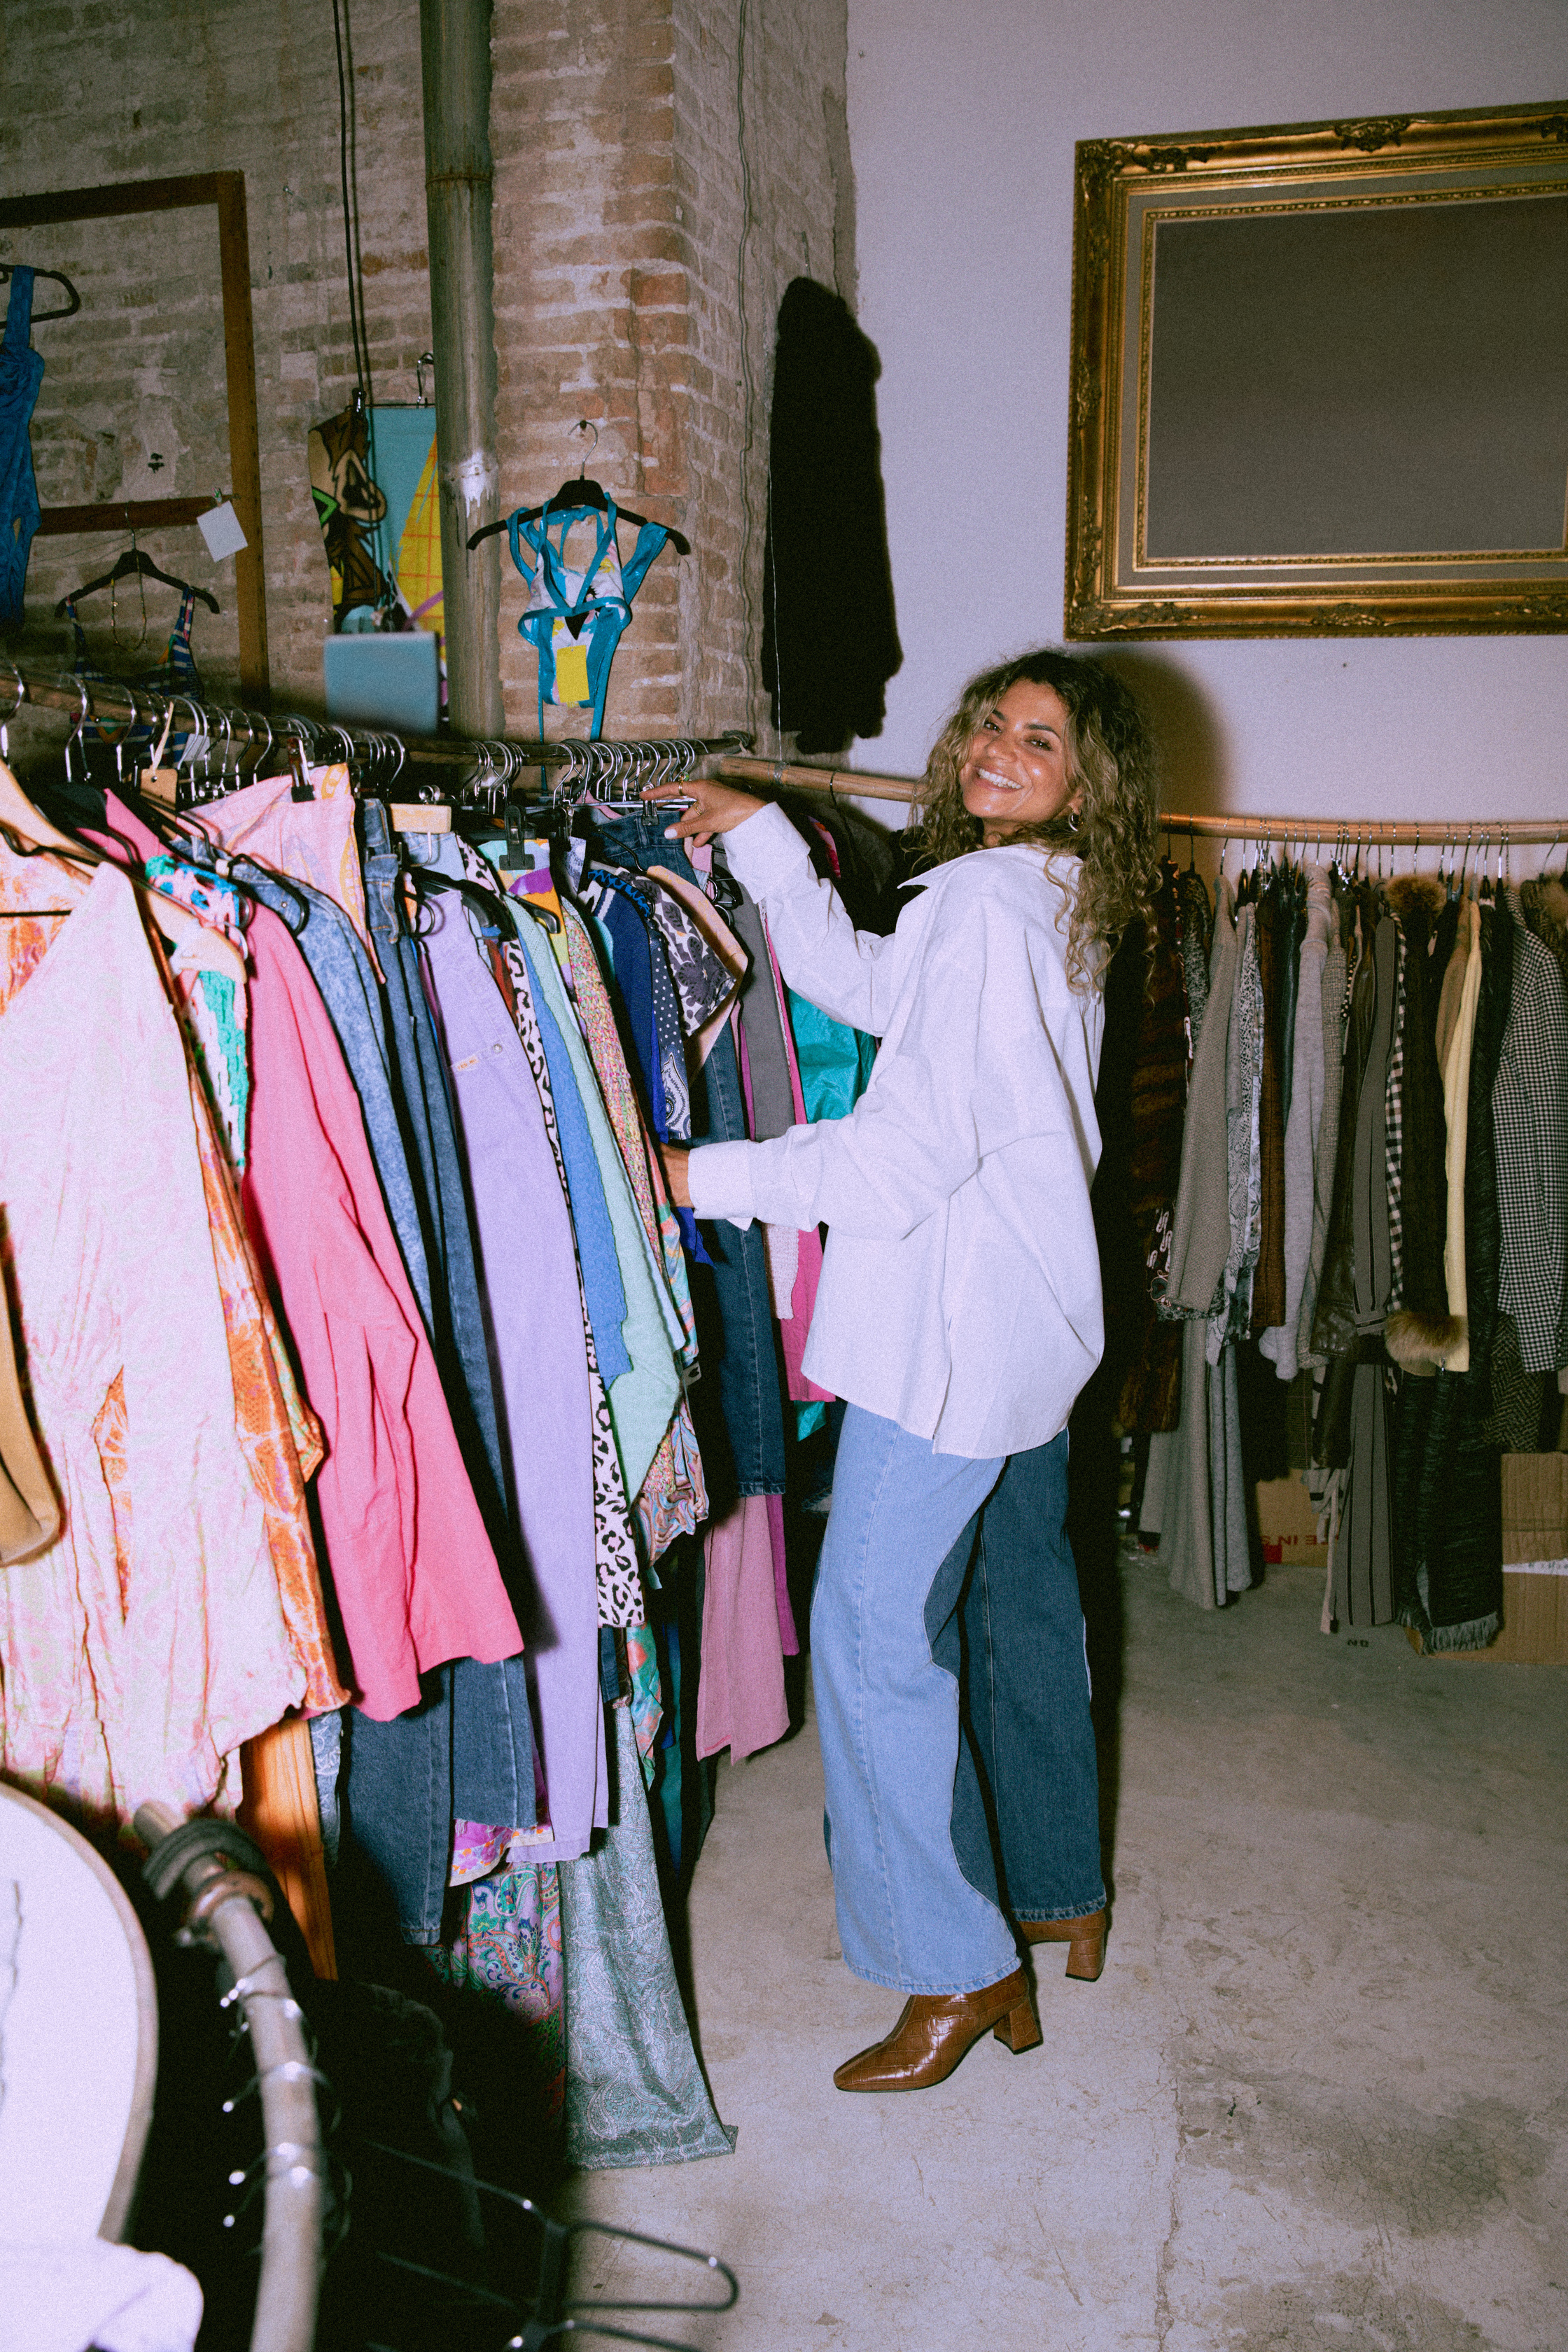 Young Woman Thrifting in a Vintage Clothing Store